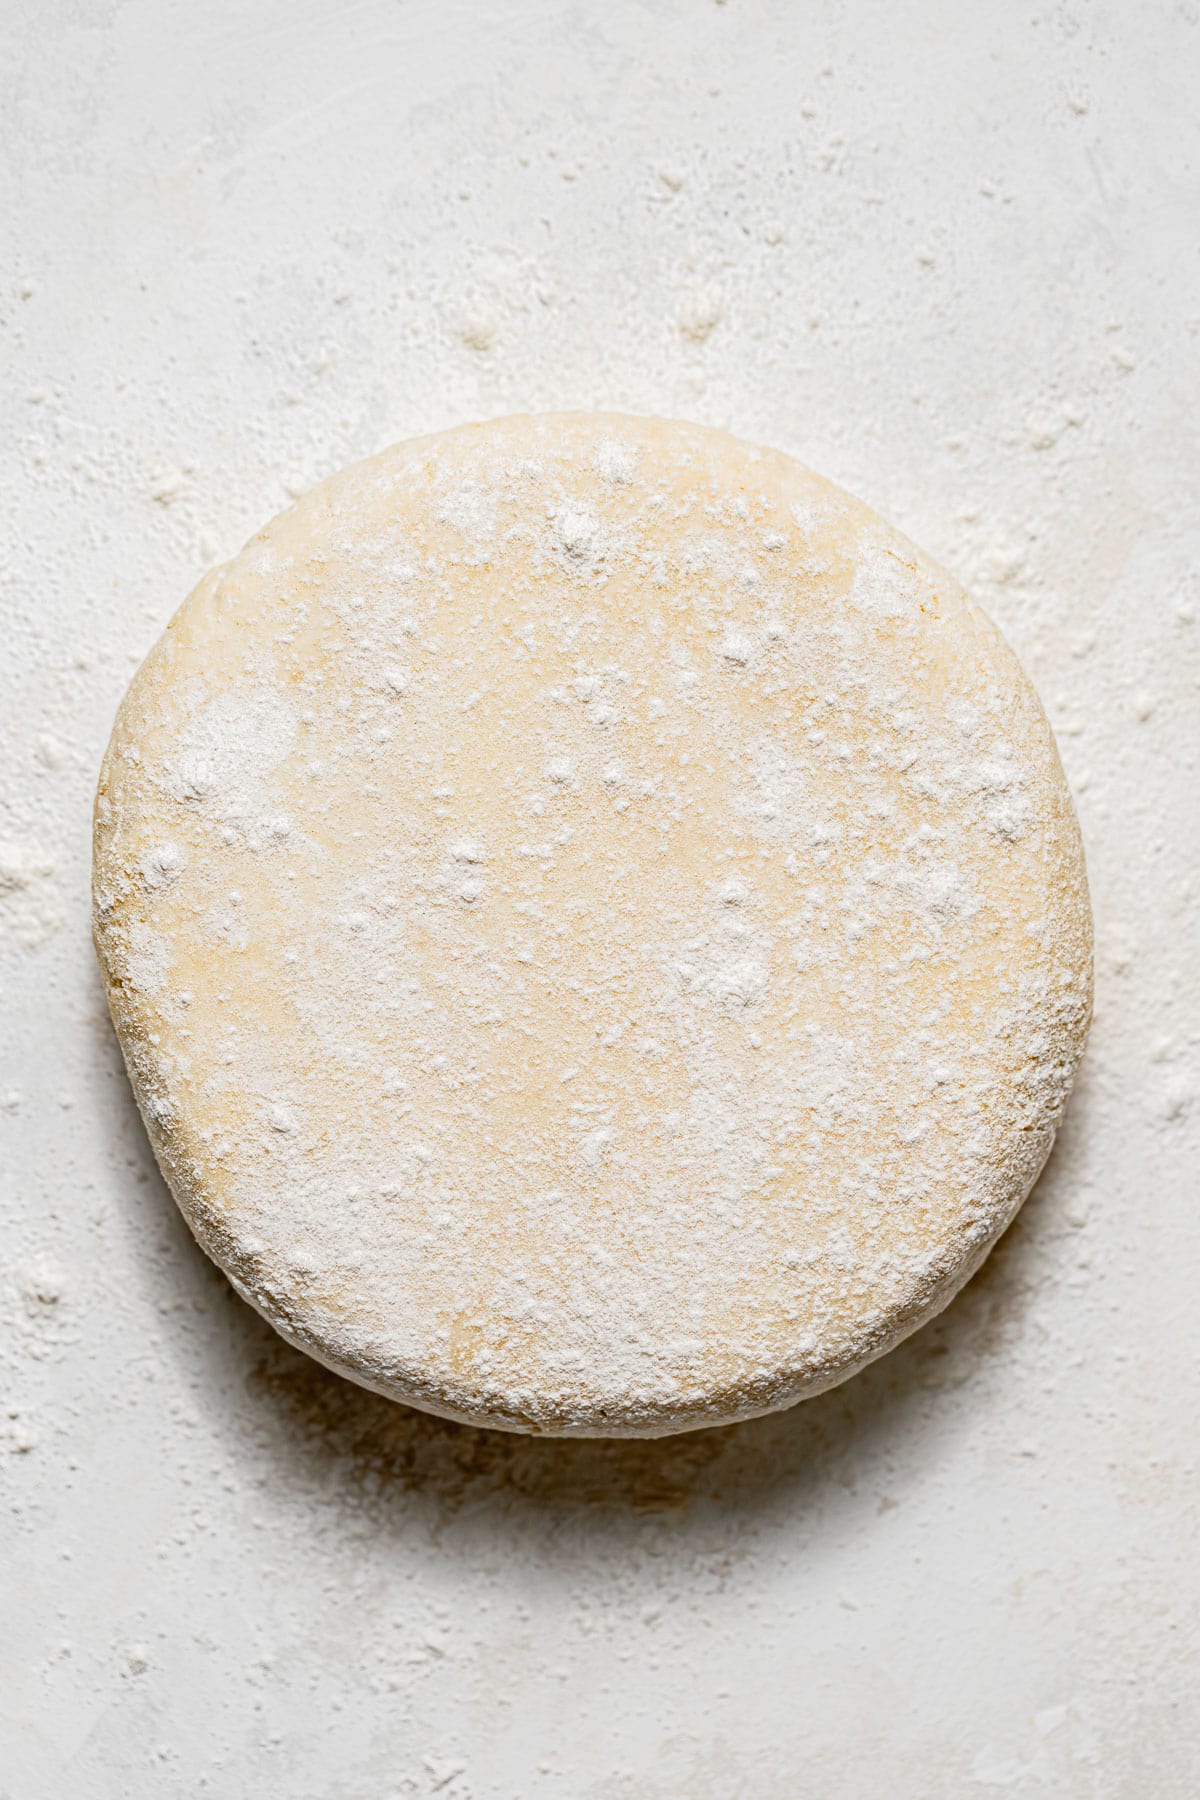 pastry shaped into disk.